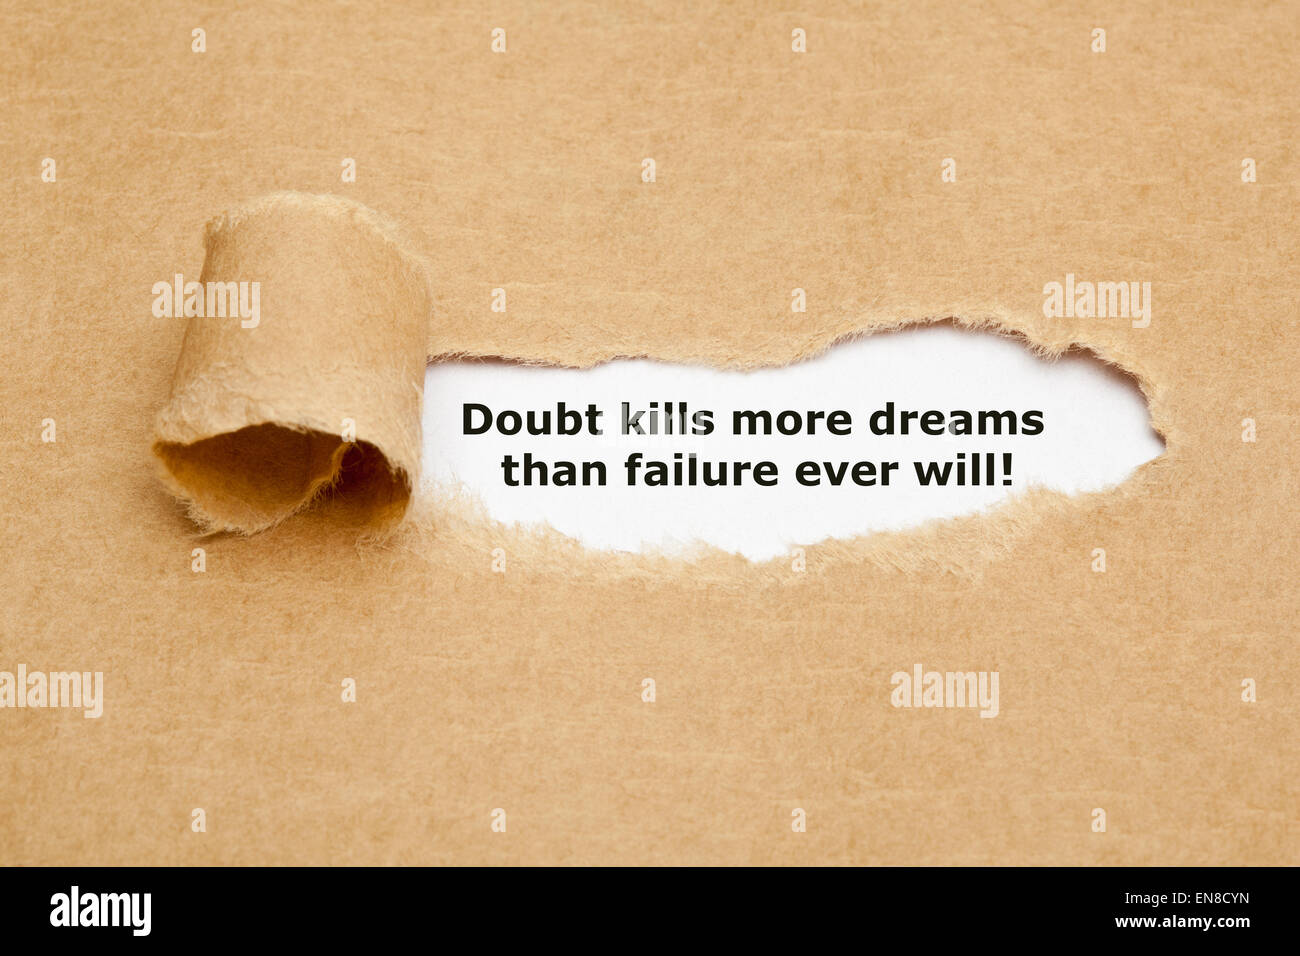 The text Doubt kills more dreams than failure ever will, appearing behind torn brown paper. Stock Photo